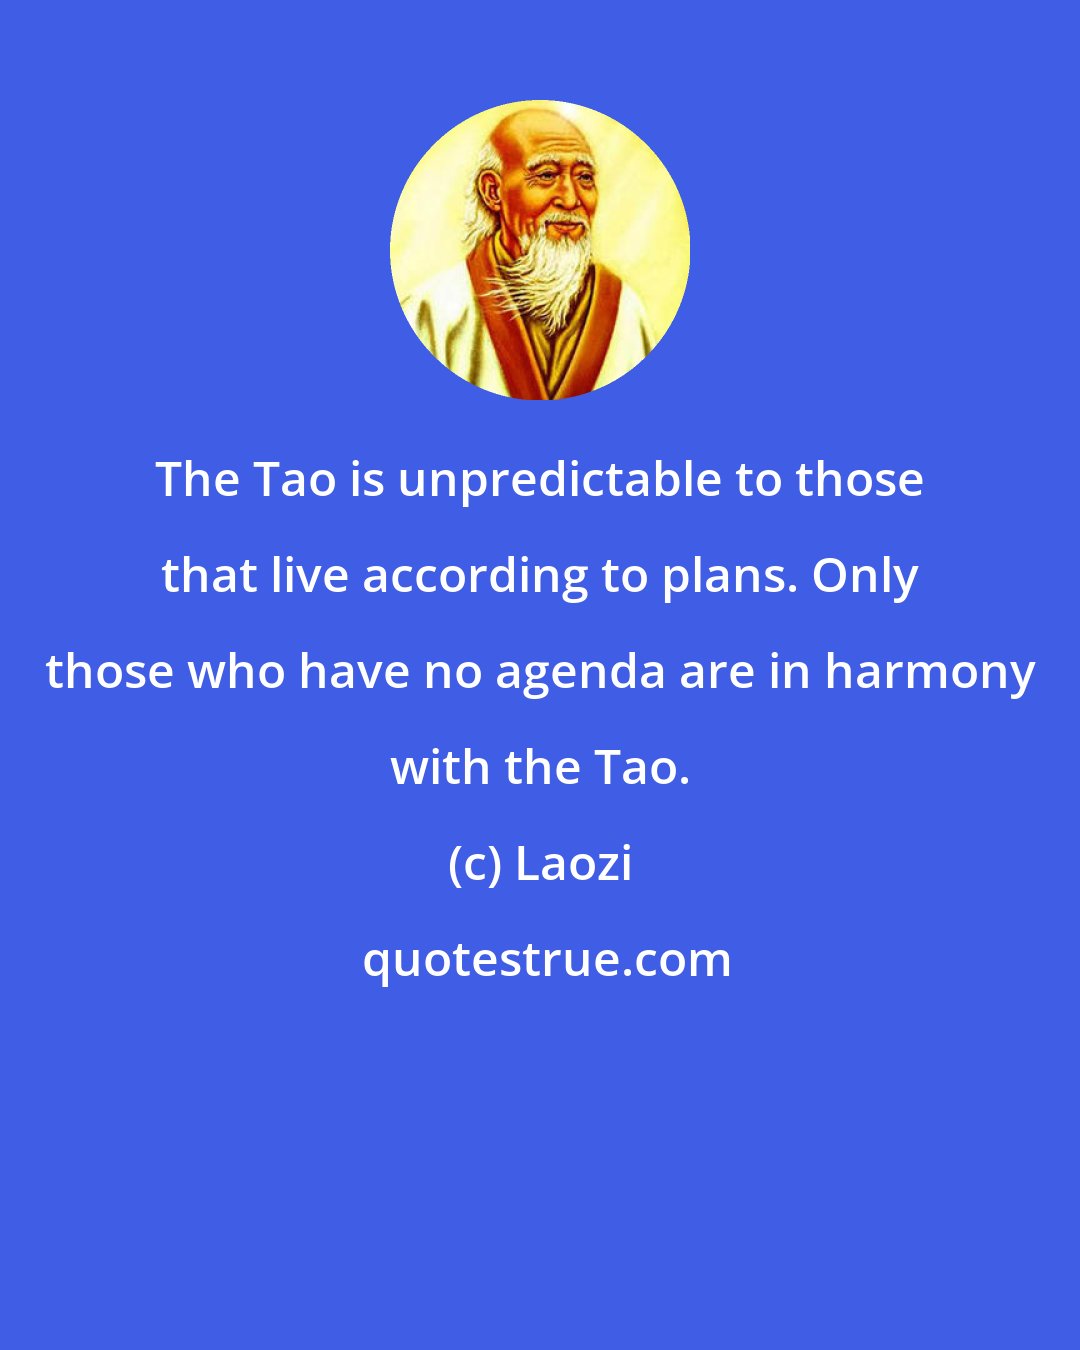 Laozi: The Tao is unpredictable to those that live according to plans. Only those who have no agenda are in harmony with the Tao.